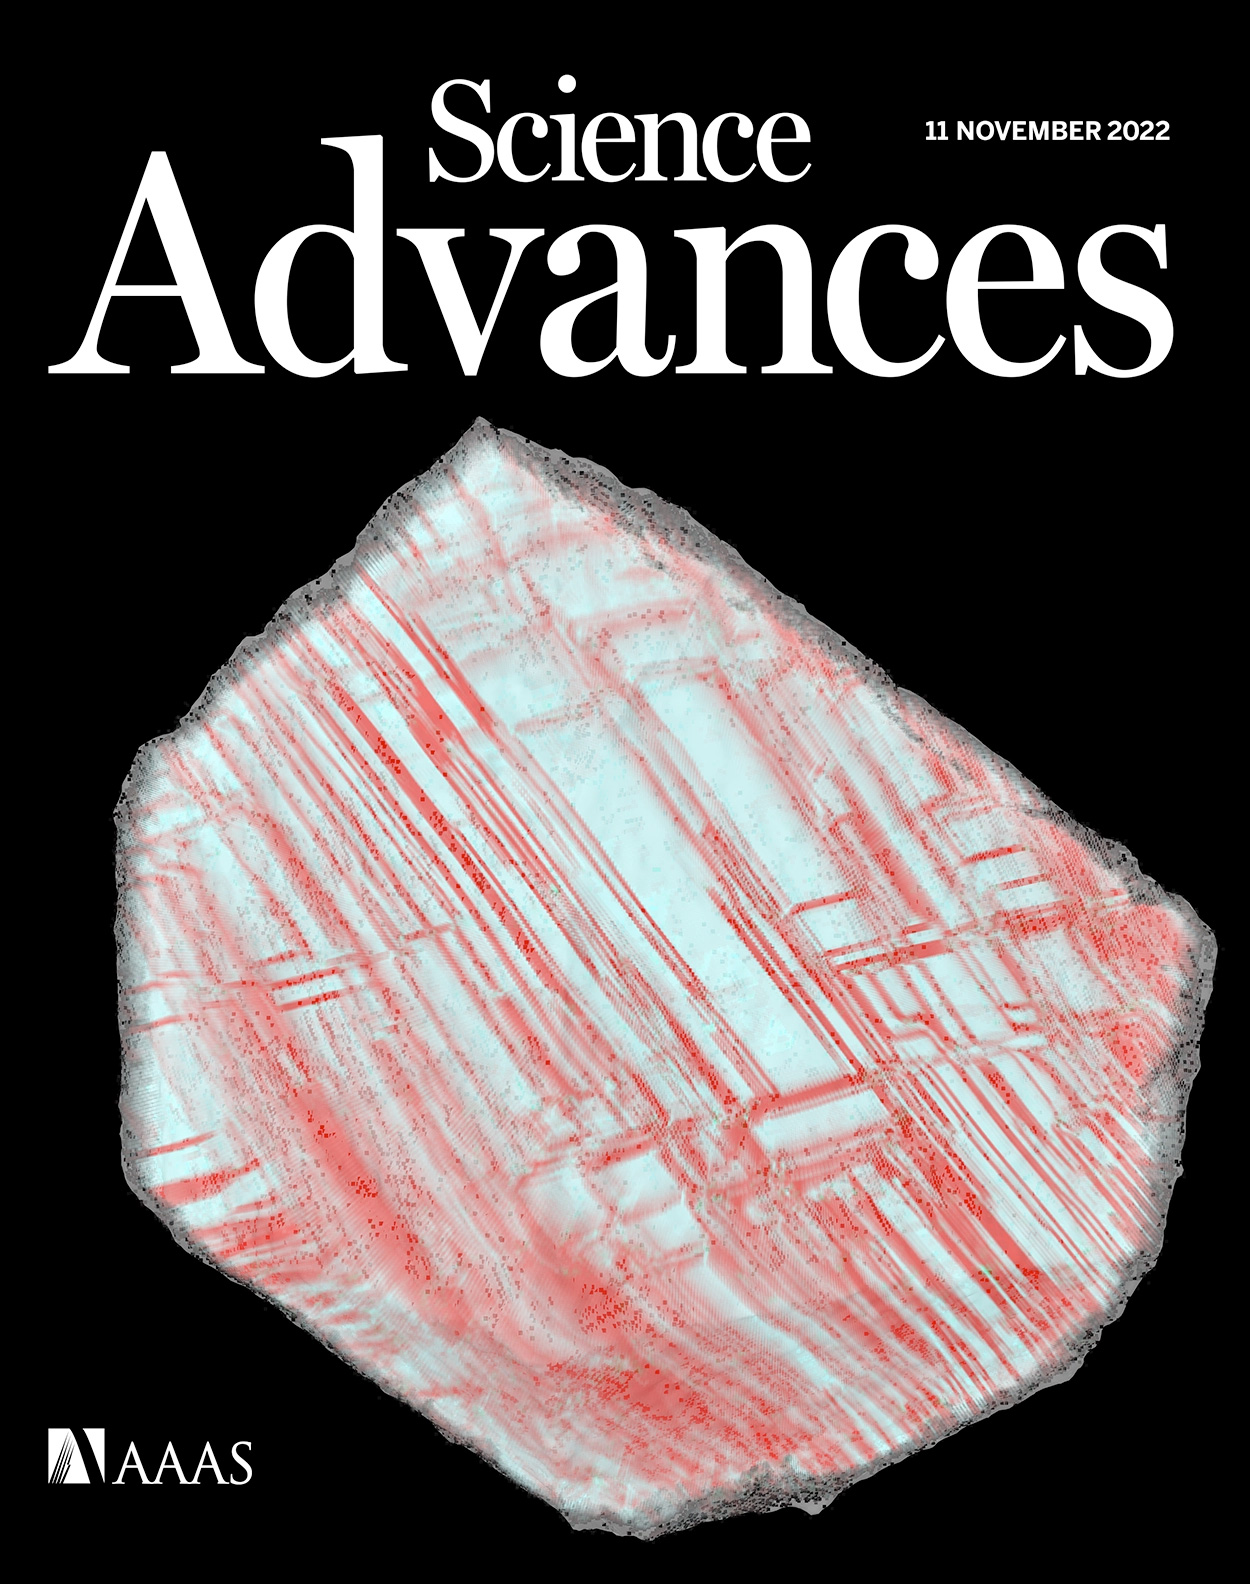 Penghui Cao’s research on dislocation patterning and deformation microstructure evolution is featured on the cover of Science Advances. The image shown is of deformation structure in an individual grain. 